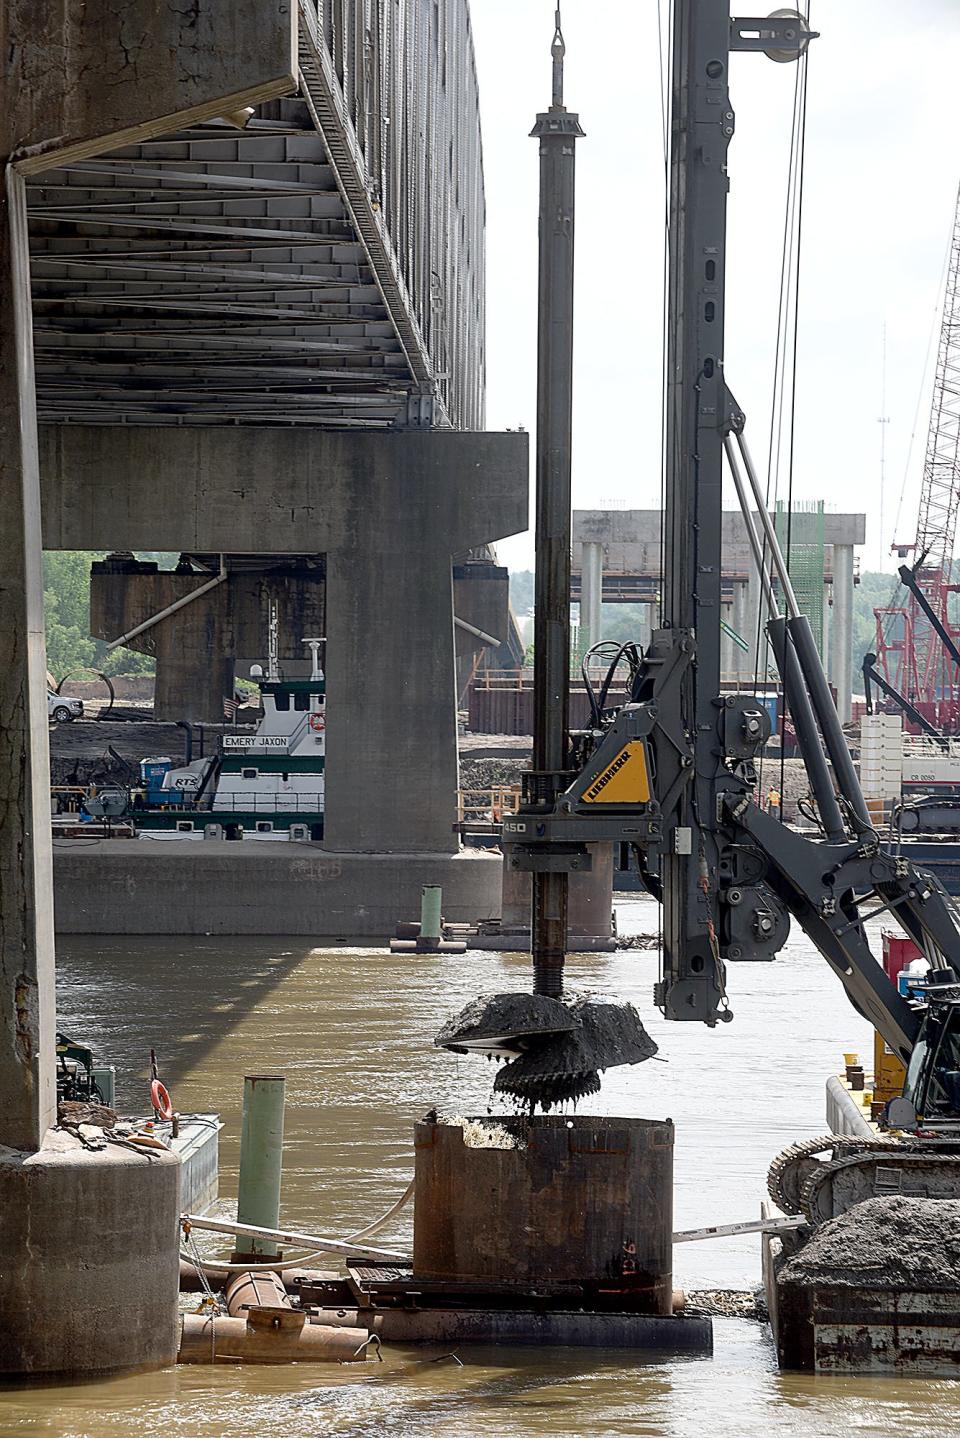 A driller raises the 11-foot diameter drill bit that is being used to drill holes for bridge pillars 50 feet below river water and another 20 feet into bedrock on Thursday at the new Lance Cpl. Leon Deraps' Interstate 70 Missouri River Bridge. The first bridge is expected to be completed in 2023 and the second bridge in 2024.